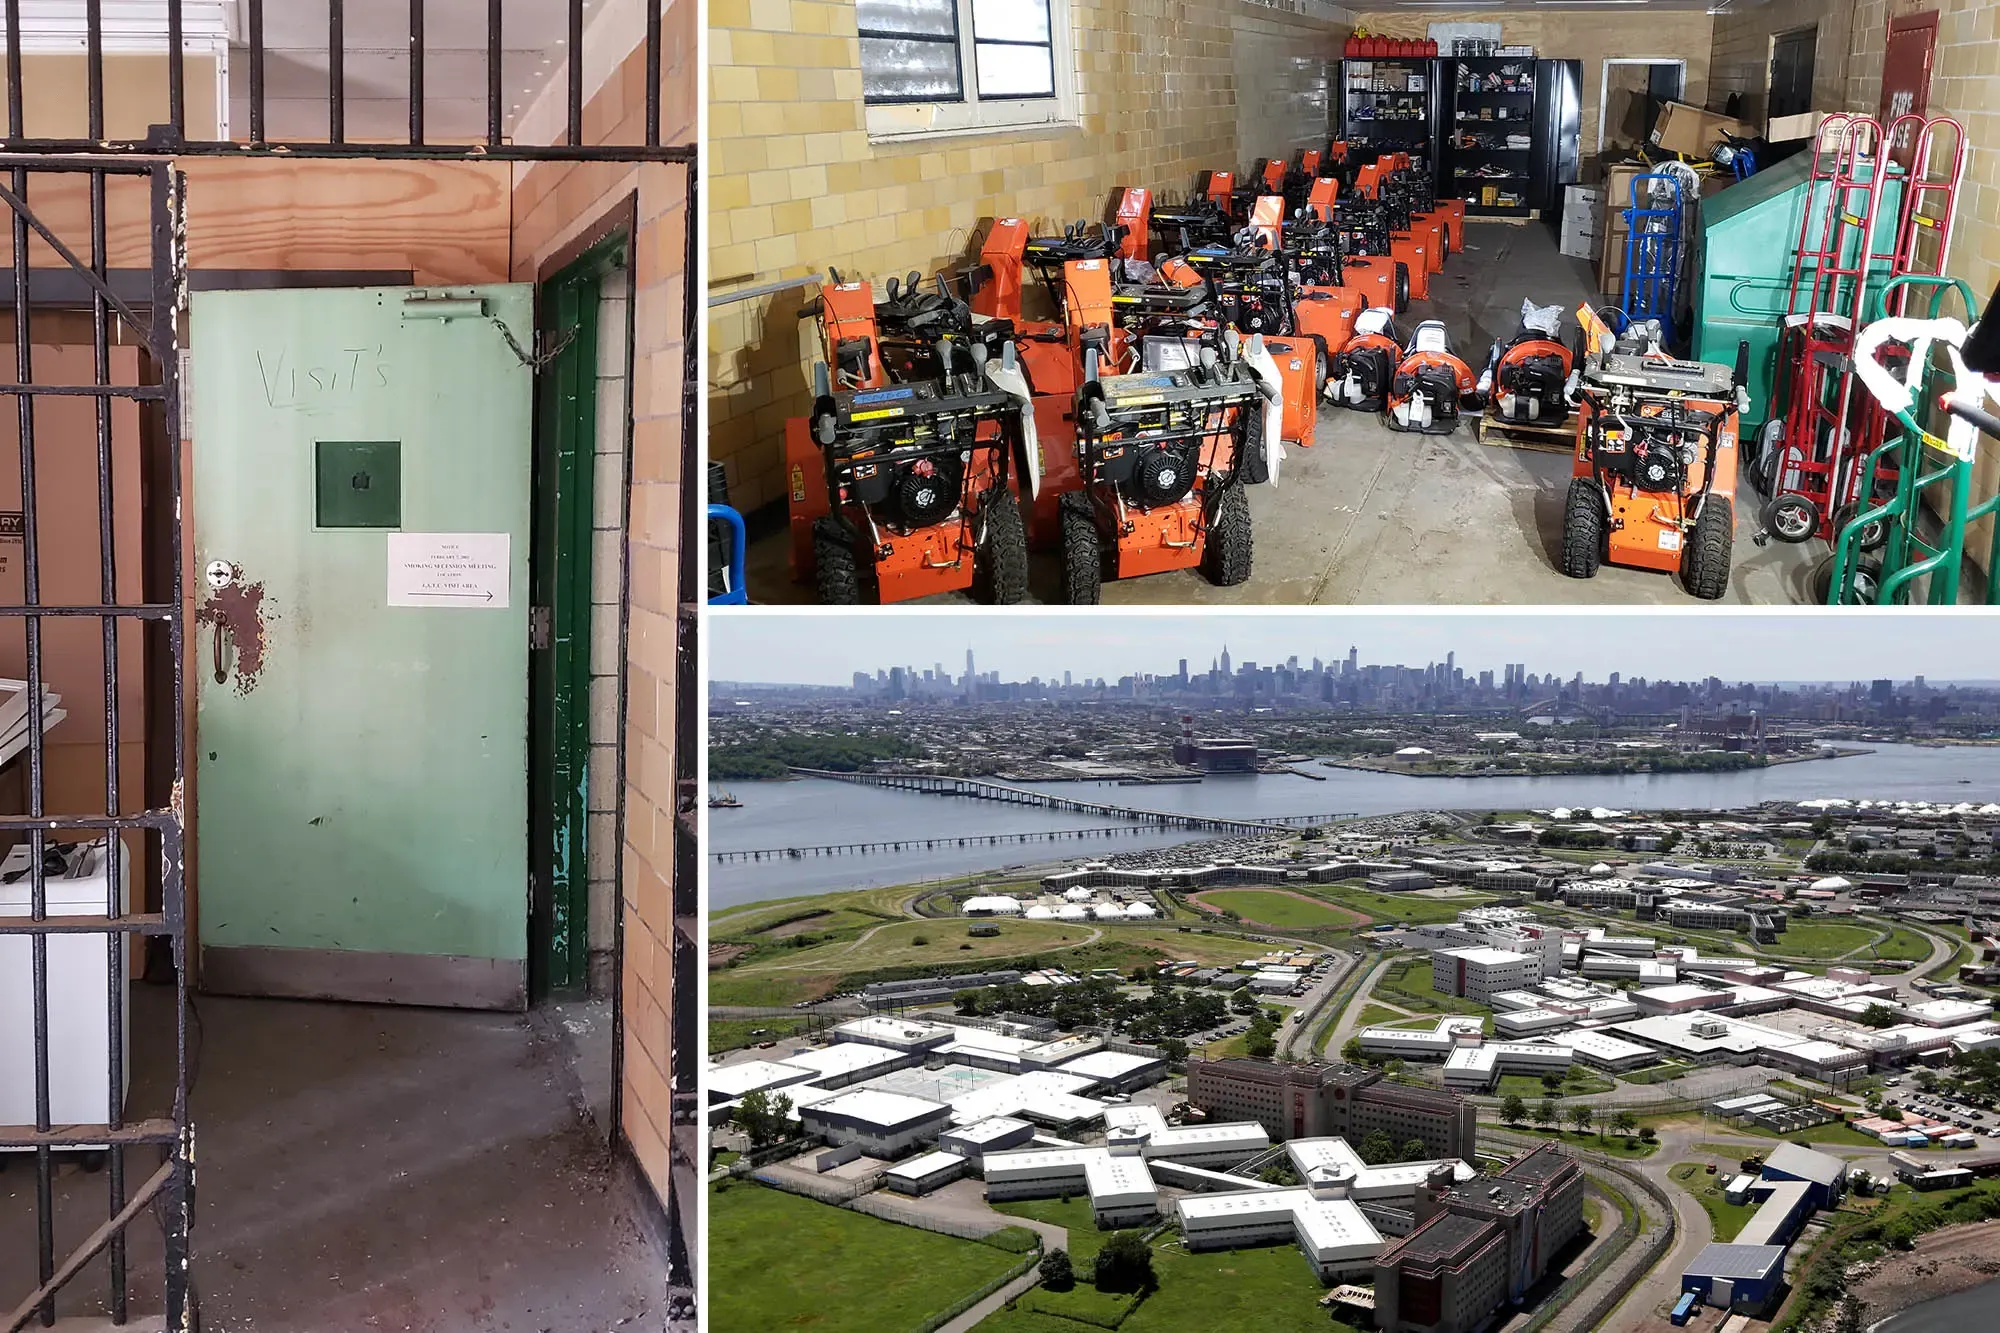 NYC investigators found more than $780K in unused equipment in closed Rikers Island facility that contained hidden lounge